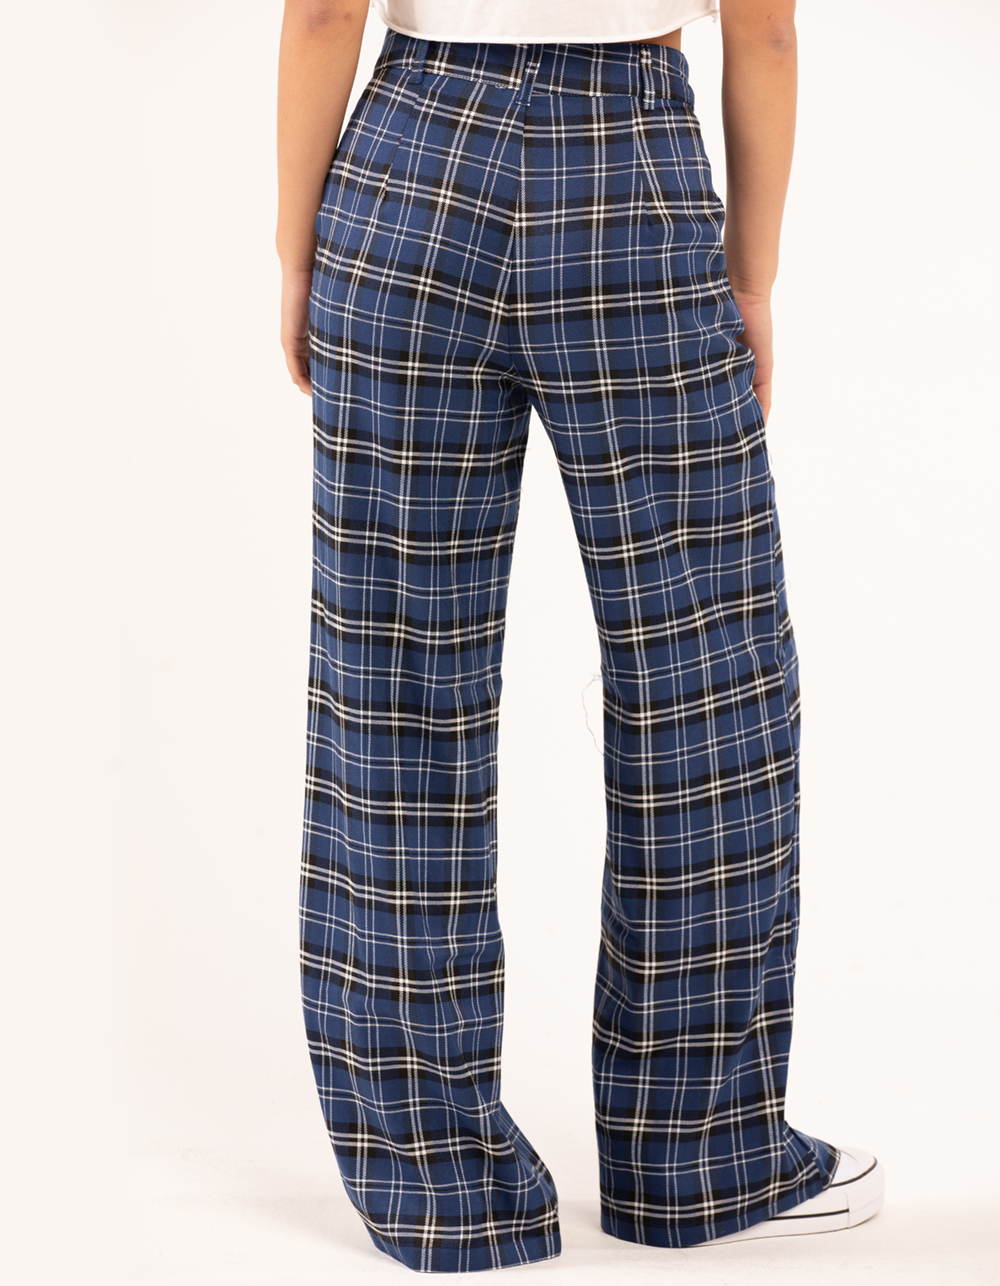 Plaid Pants In The Summer | Carolina Pinglo